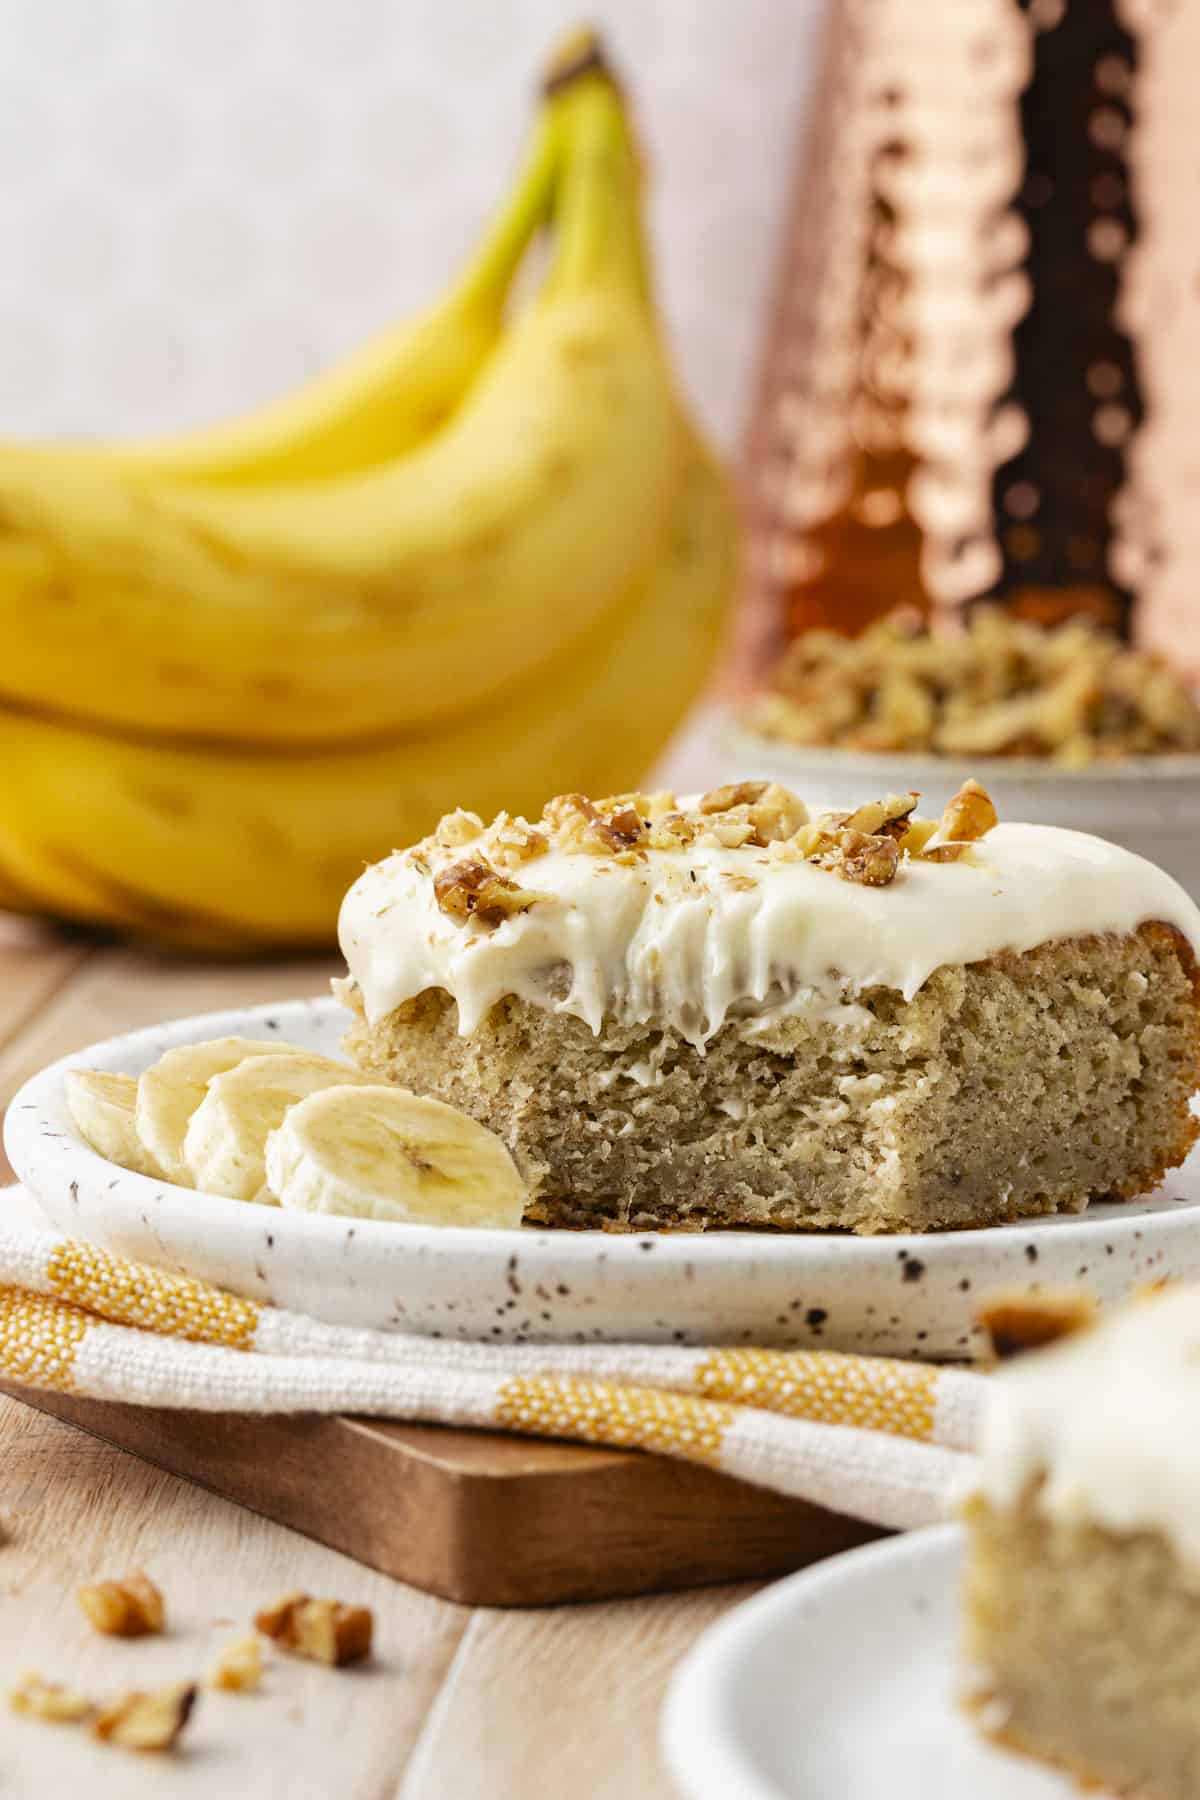 a slice of banana cake on a small plate sitting on top of a white and yellow striped towel on a wooden board, surrounded by more cake, a bowl of walnuts, and whole bananas